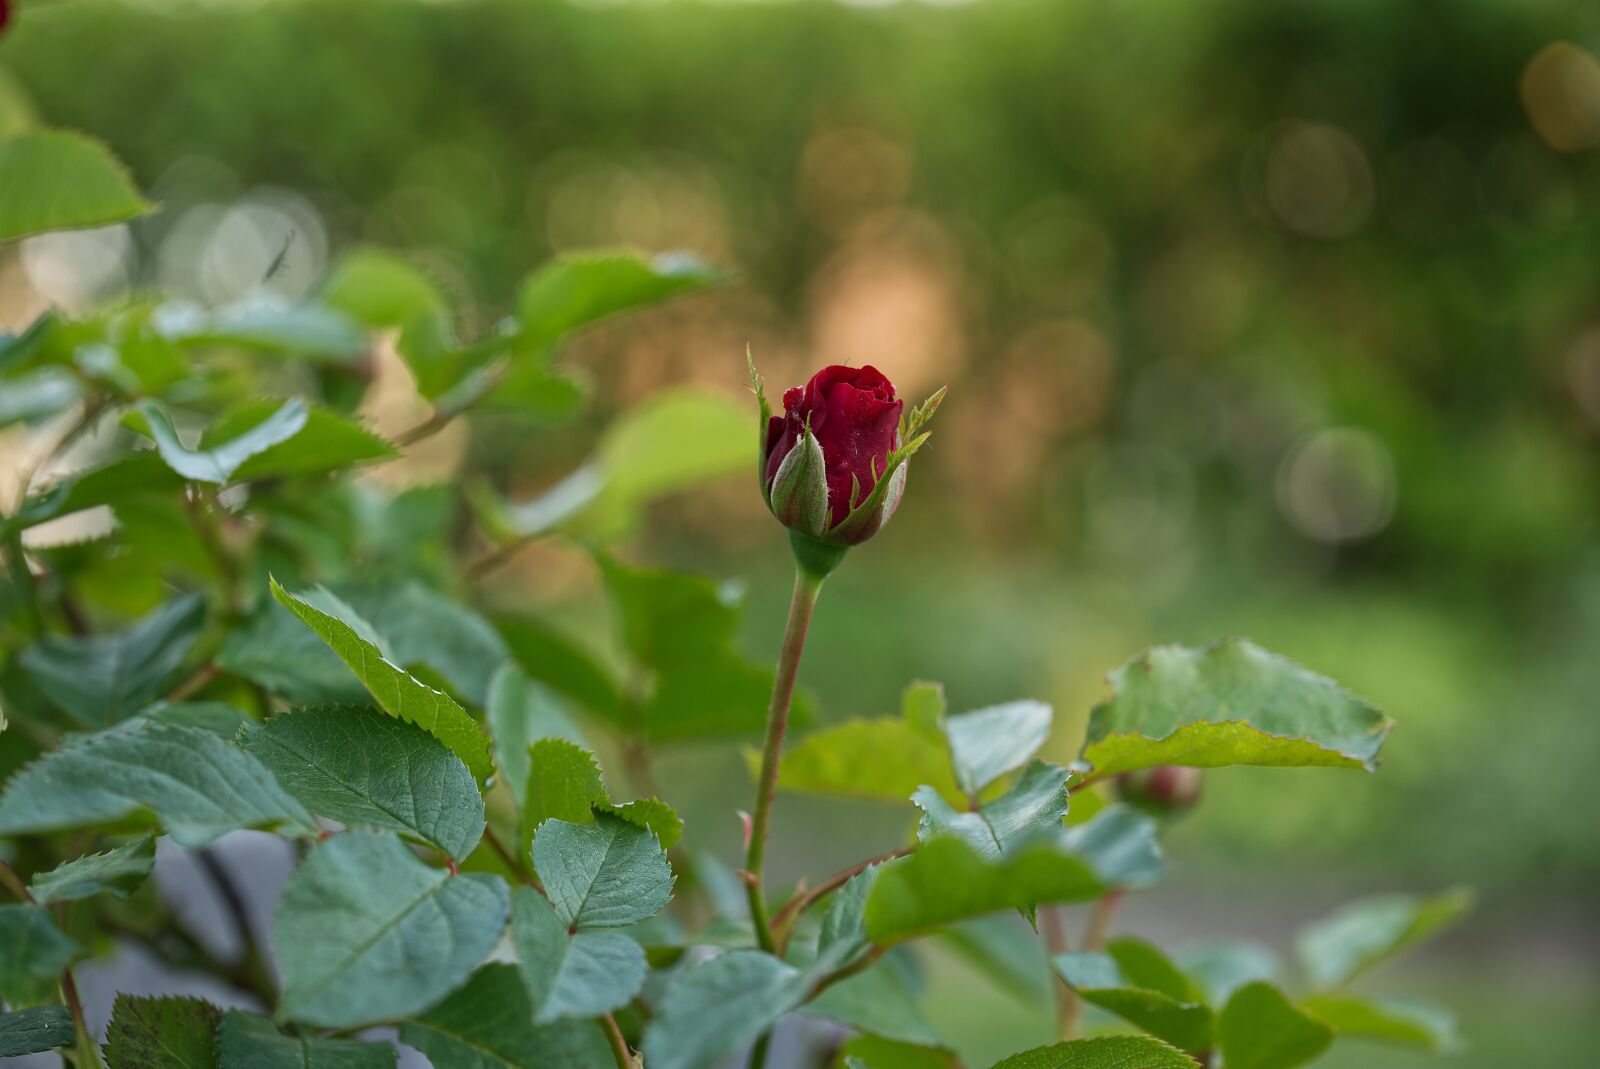 Sony a7 II sample photo. Rose, garden, nature photography